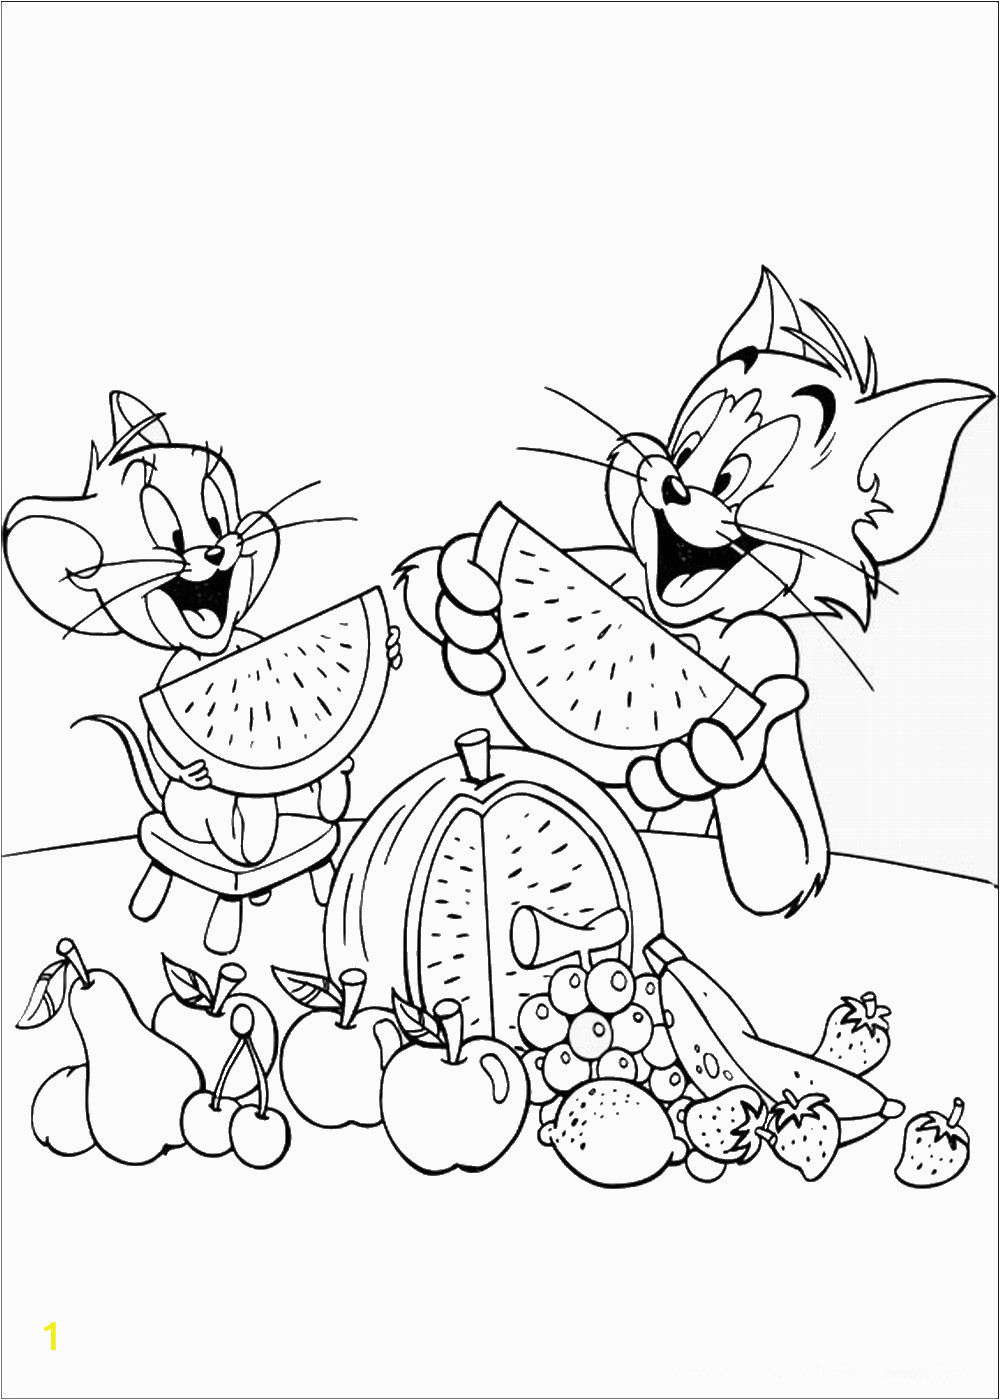 tom and jerry christmas coloring pages